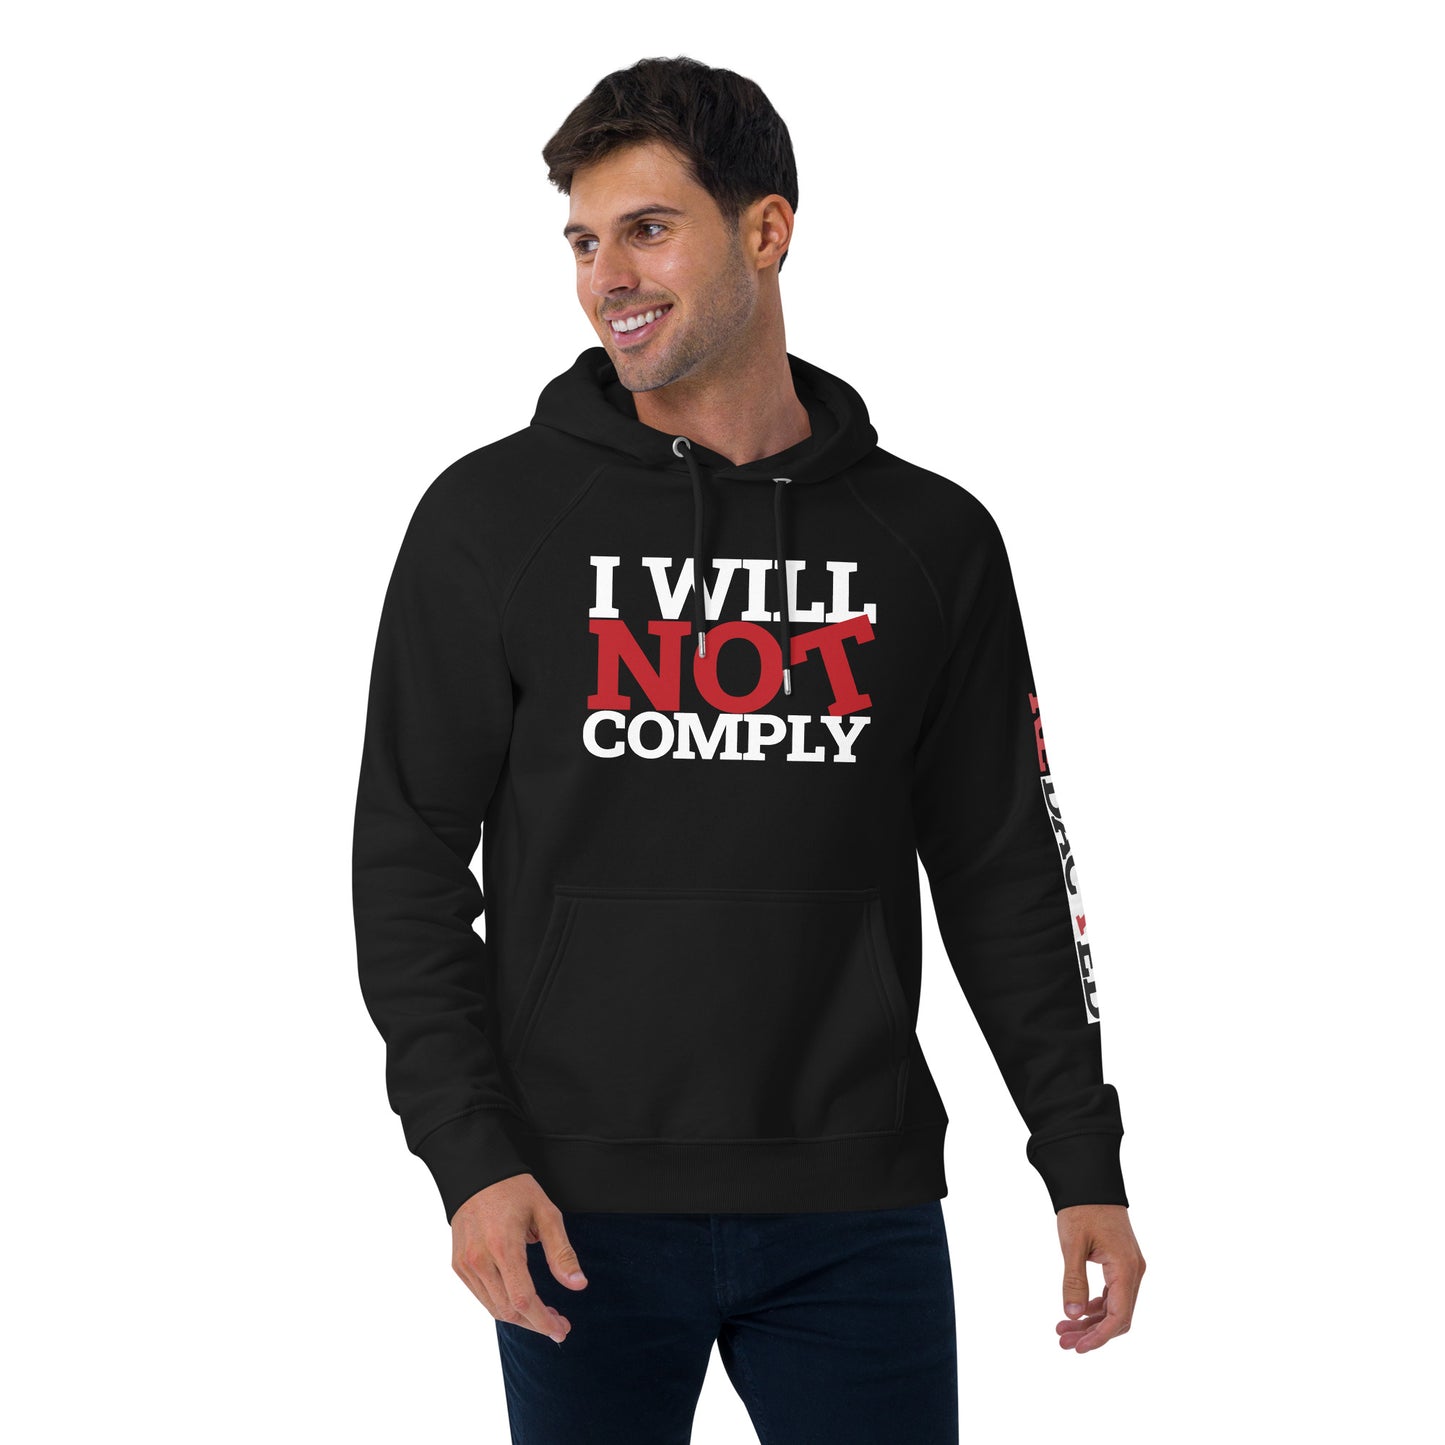 I WILL NOT COMPLY Unisex eco raglan hoodie